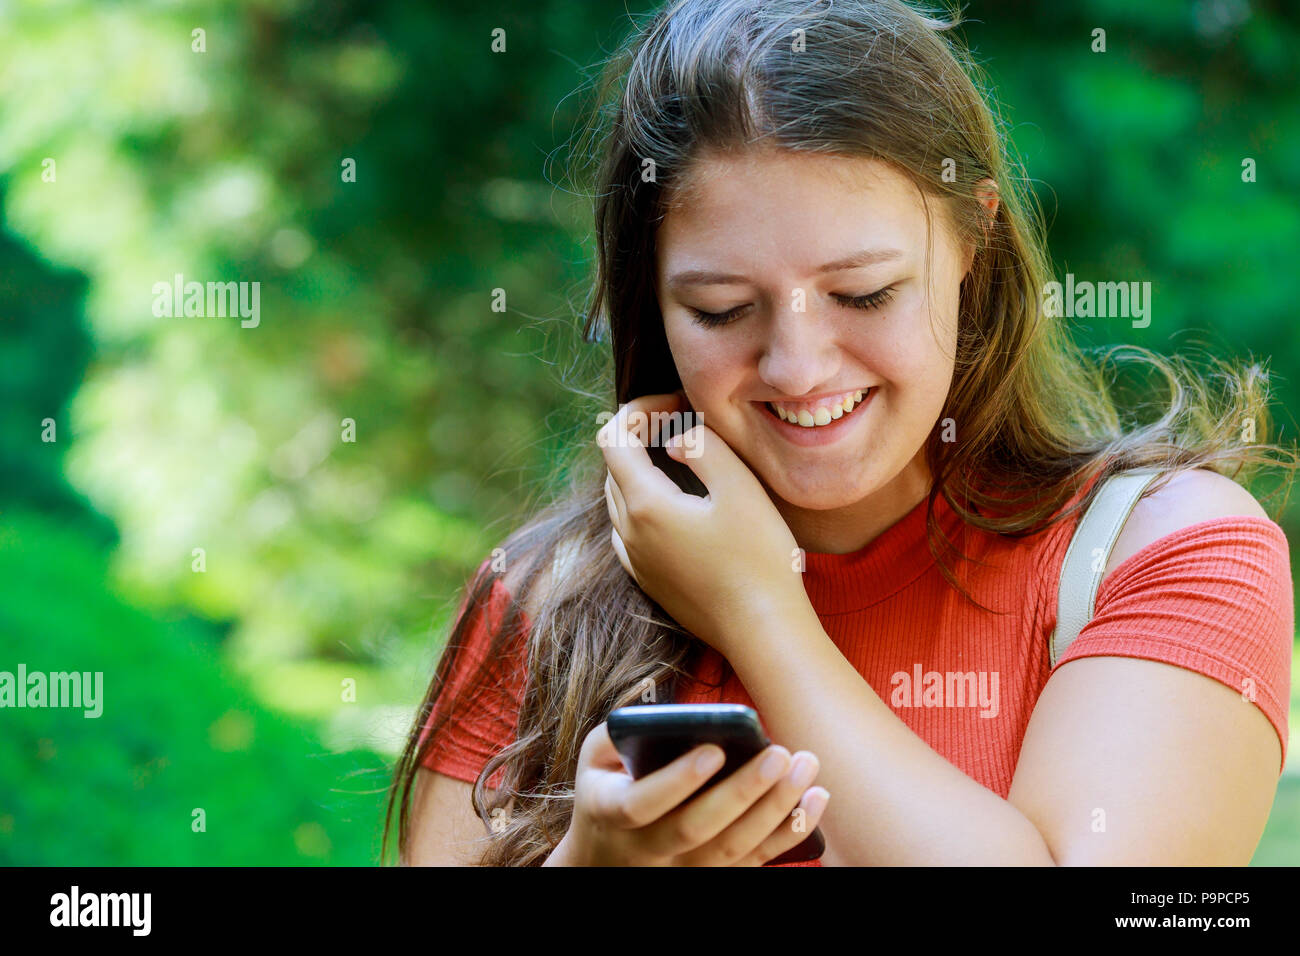 Cute young girl holding smartphone using in summer day in a park smiling and looking at camera. Stock Photo